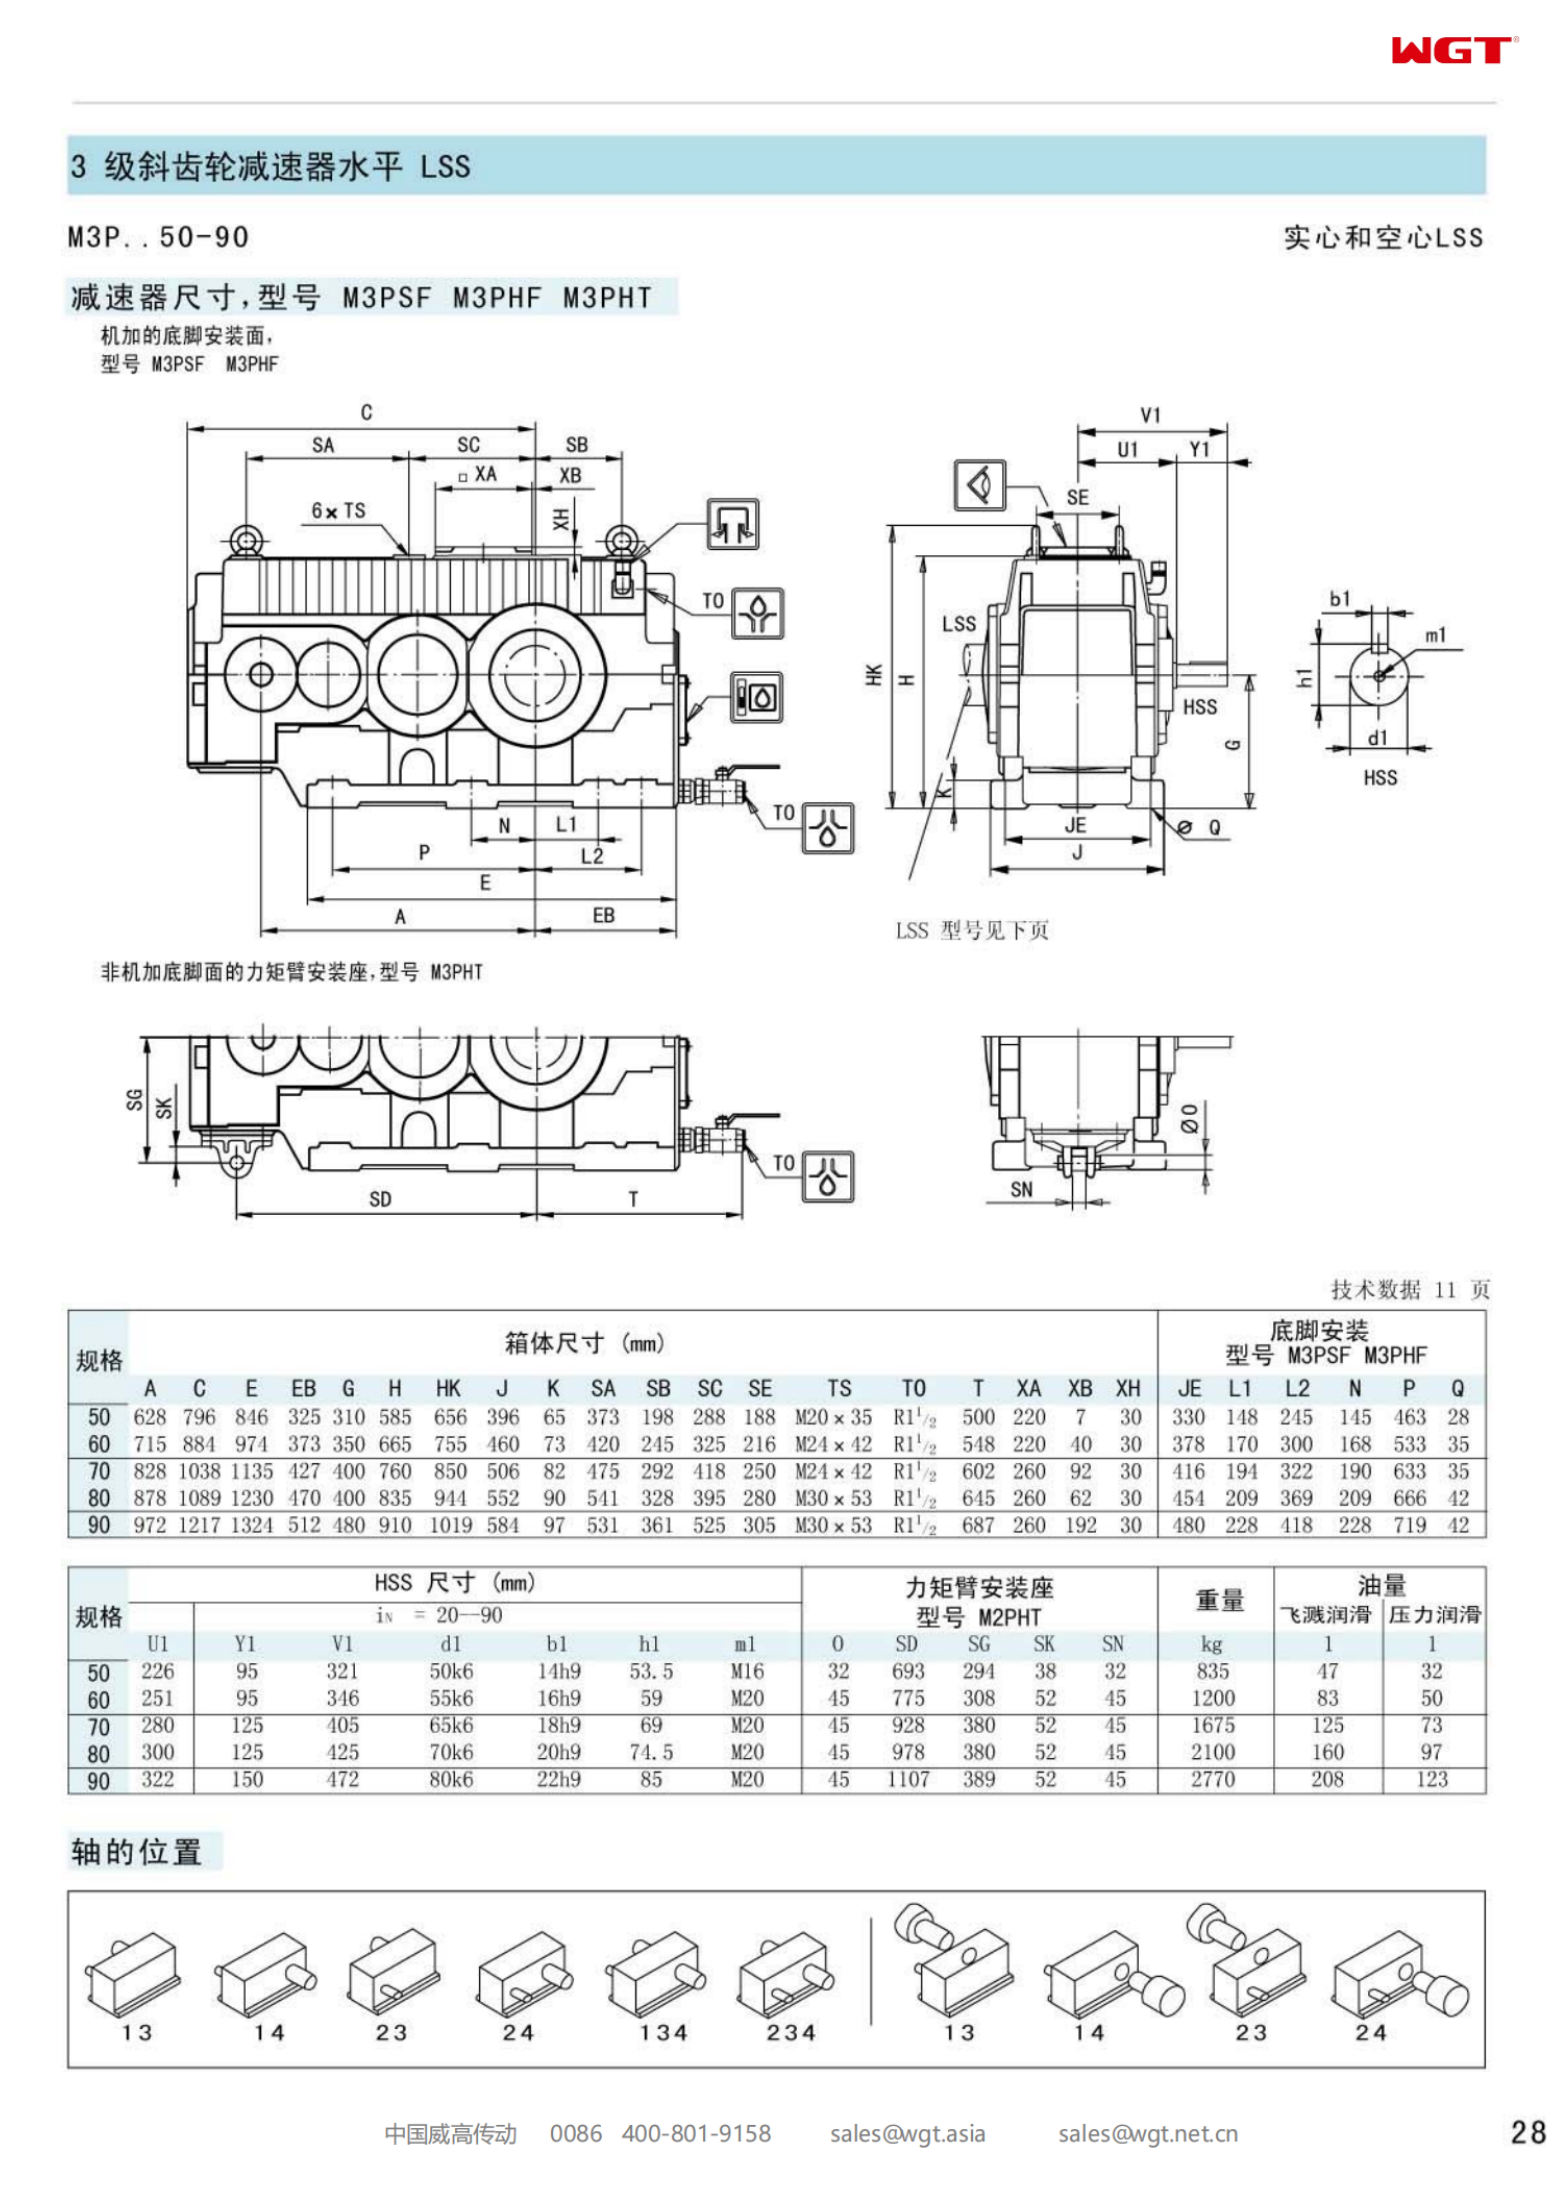 M3PHT90 Replace_SEW_M_Series Gearbox